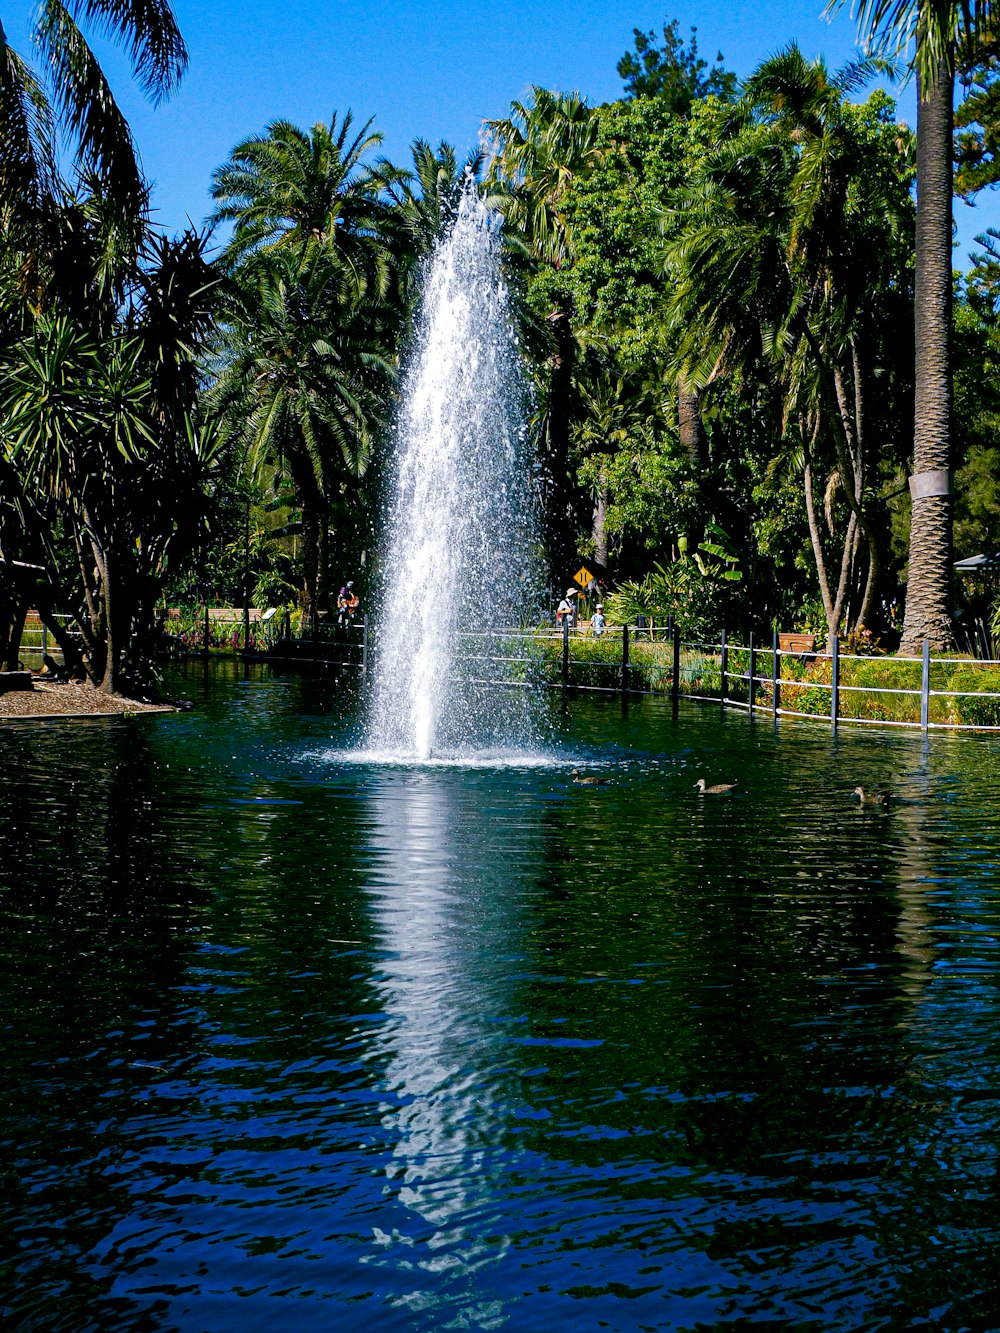 a large fountain spewing water into a pond surrounded by palm trees